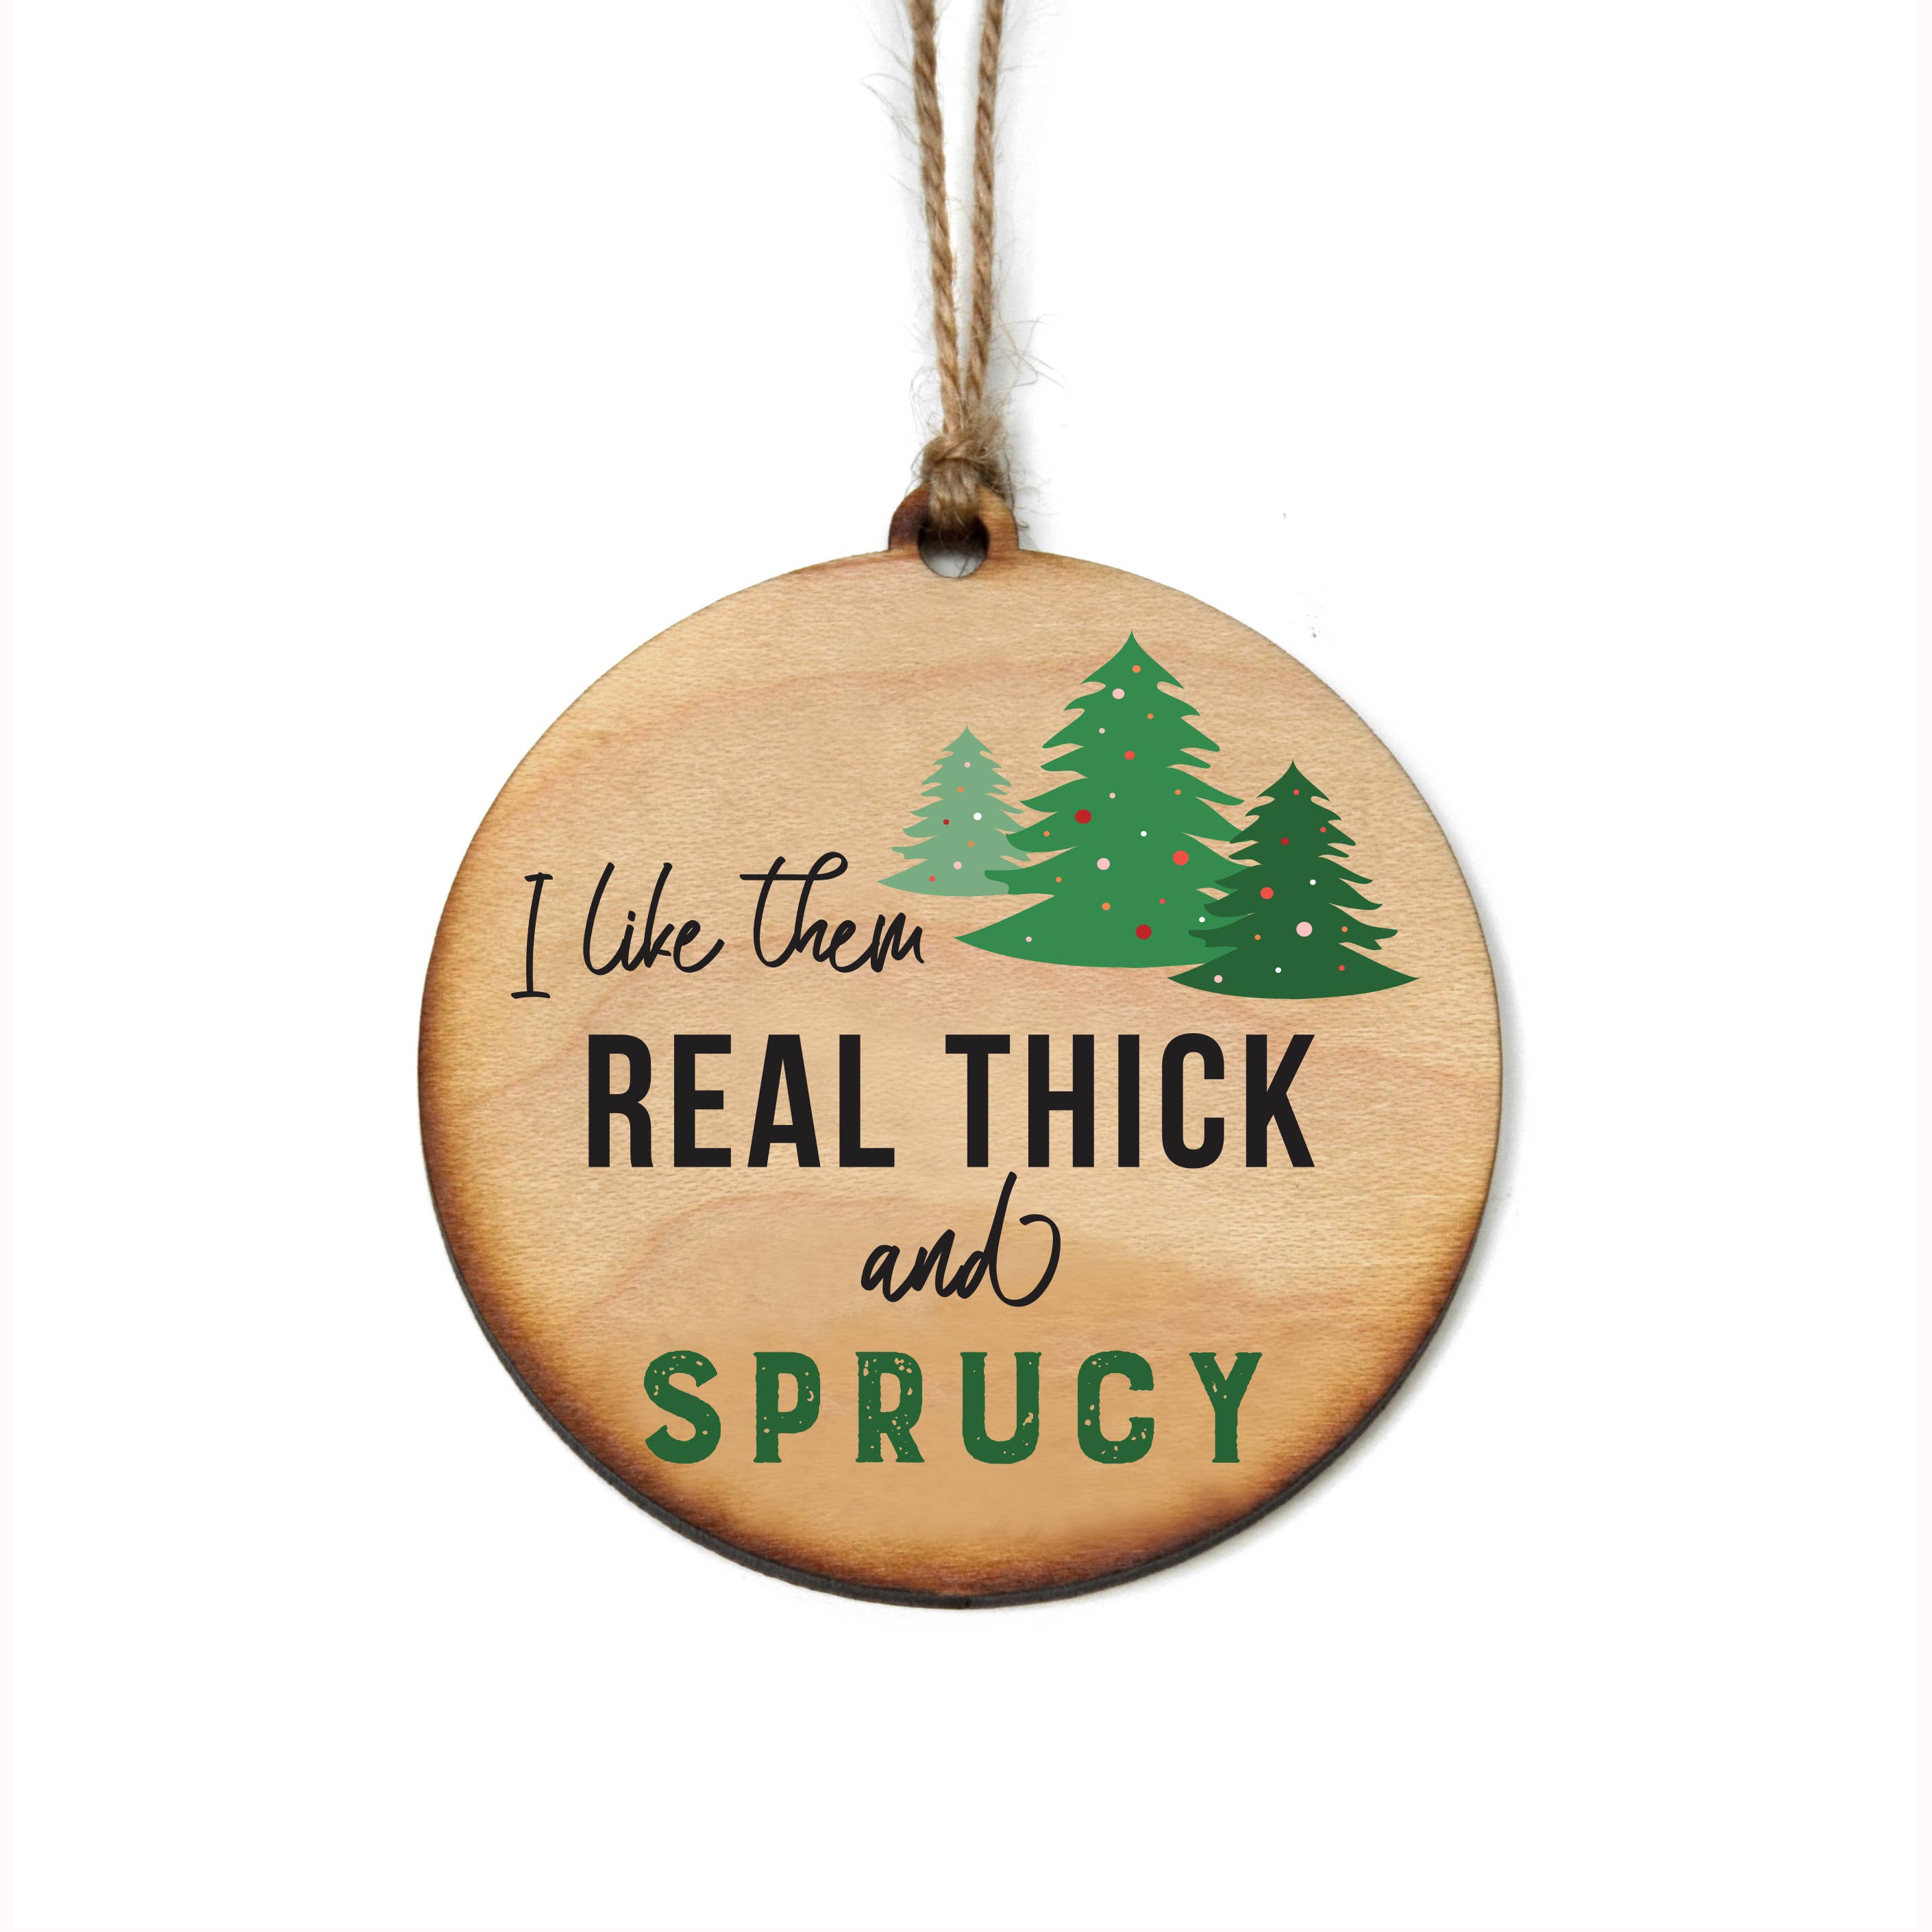 I Like Them Real Thick And Sprucy Christmas Ornaments - Clearance